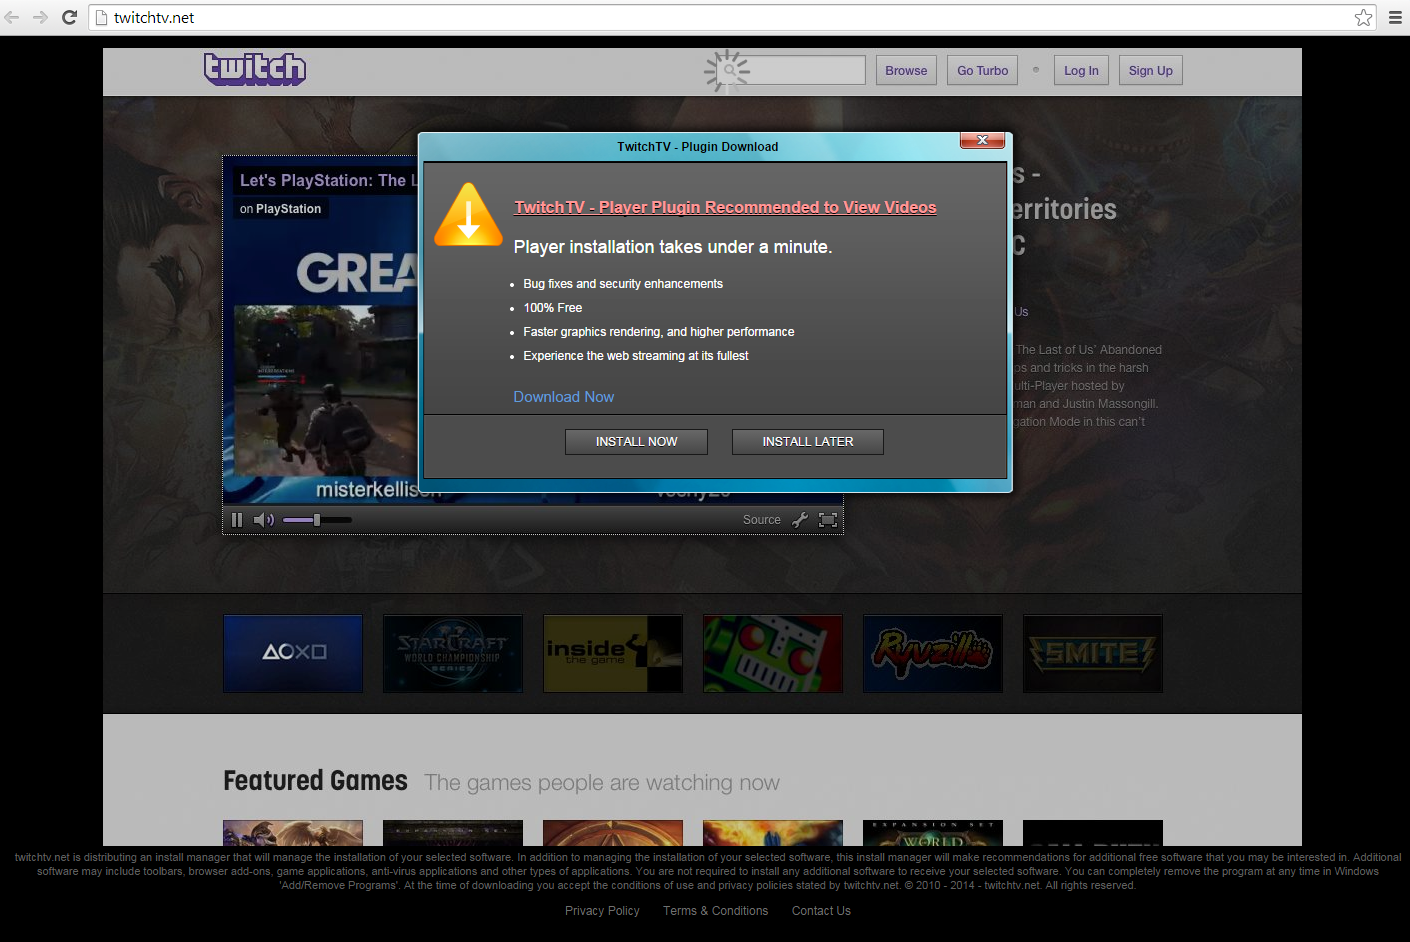 Fake Twitch TV Site Recommends PUP as Video Plugin